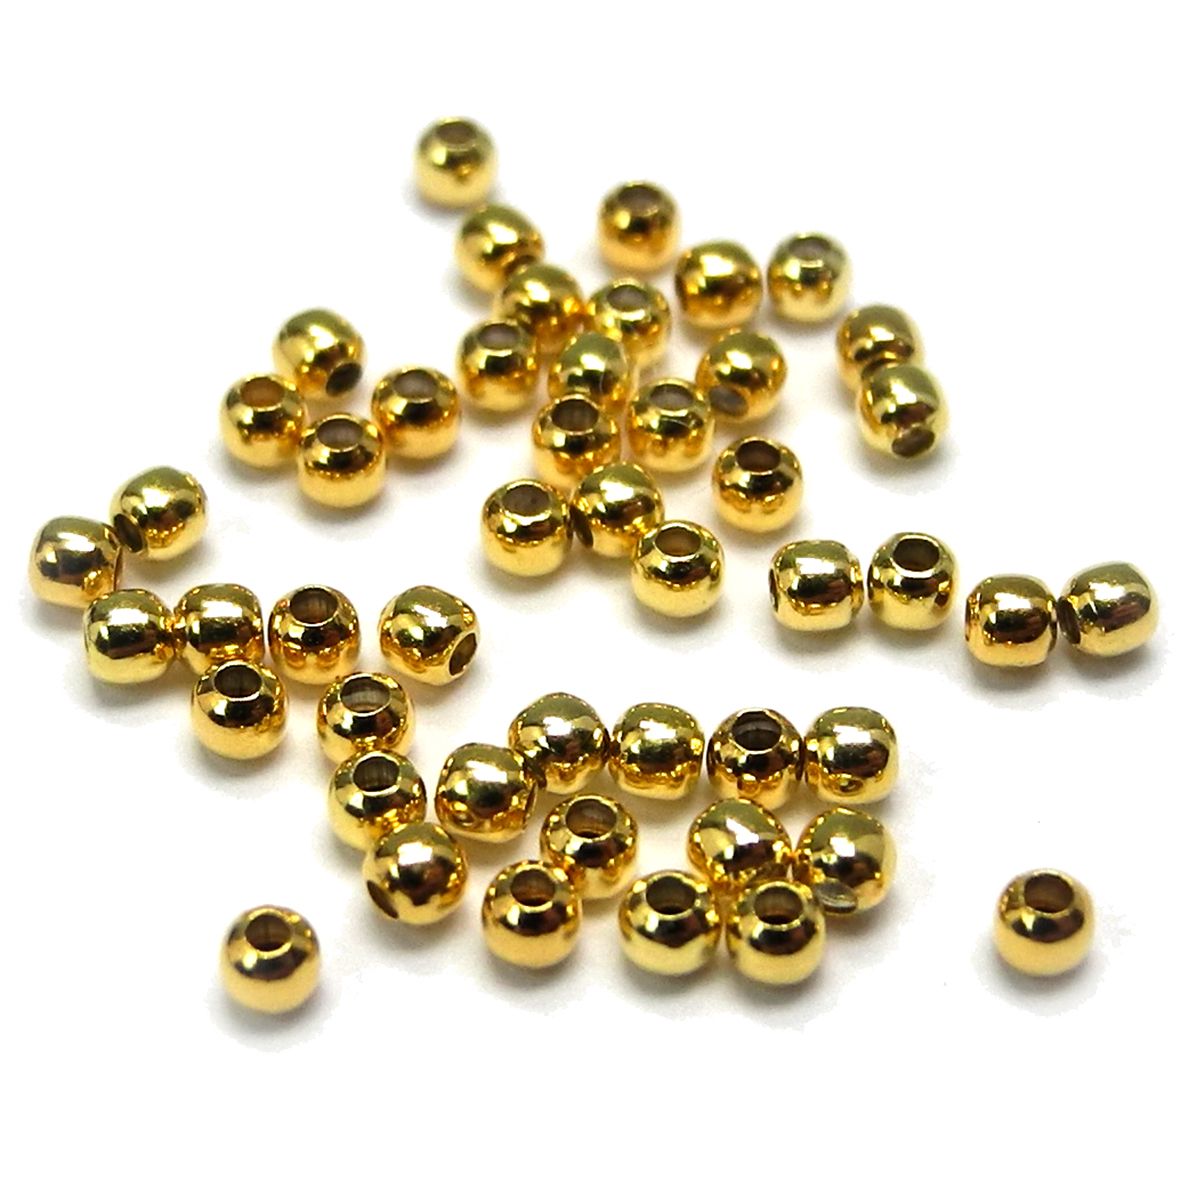 12 Packs: 150 ct. (1,800 total) 4mm Gold Clamshell Crimp Bead Covers by  Bead Landing™ 